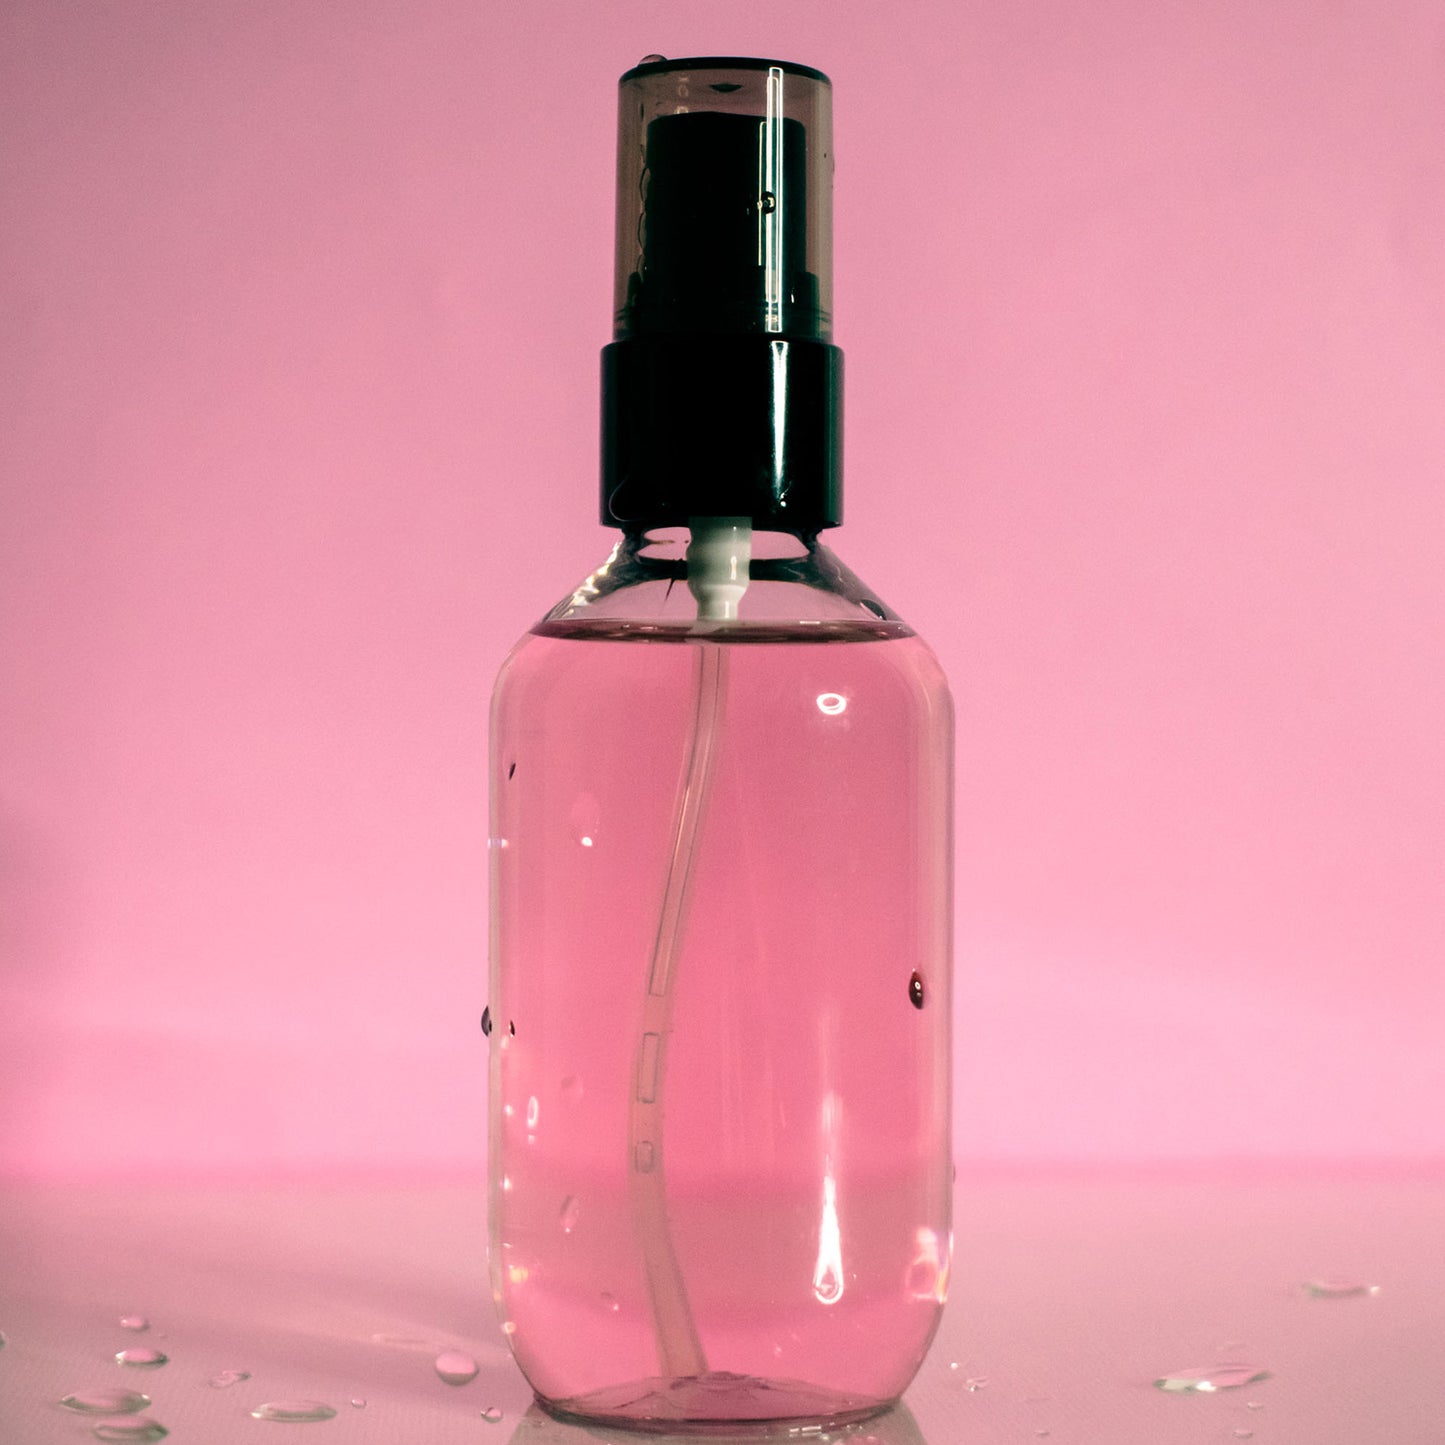 A small bottle of oil control setting spray with black spray top